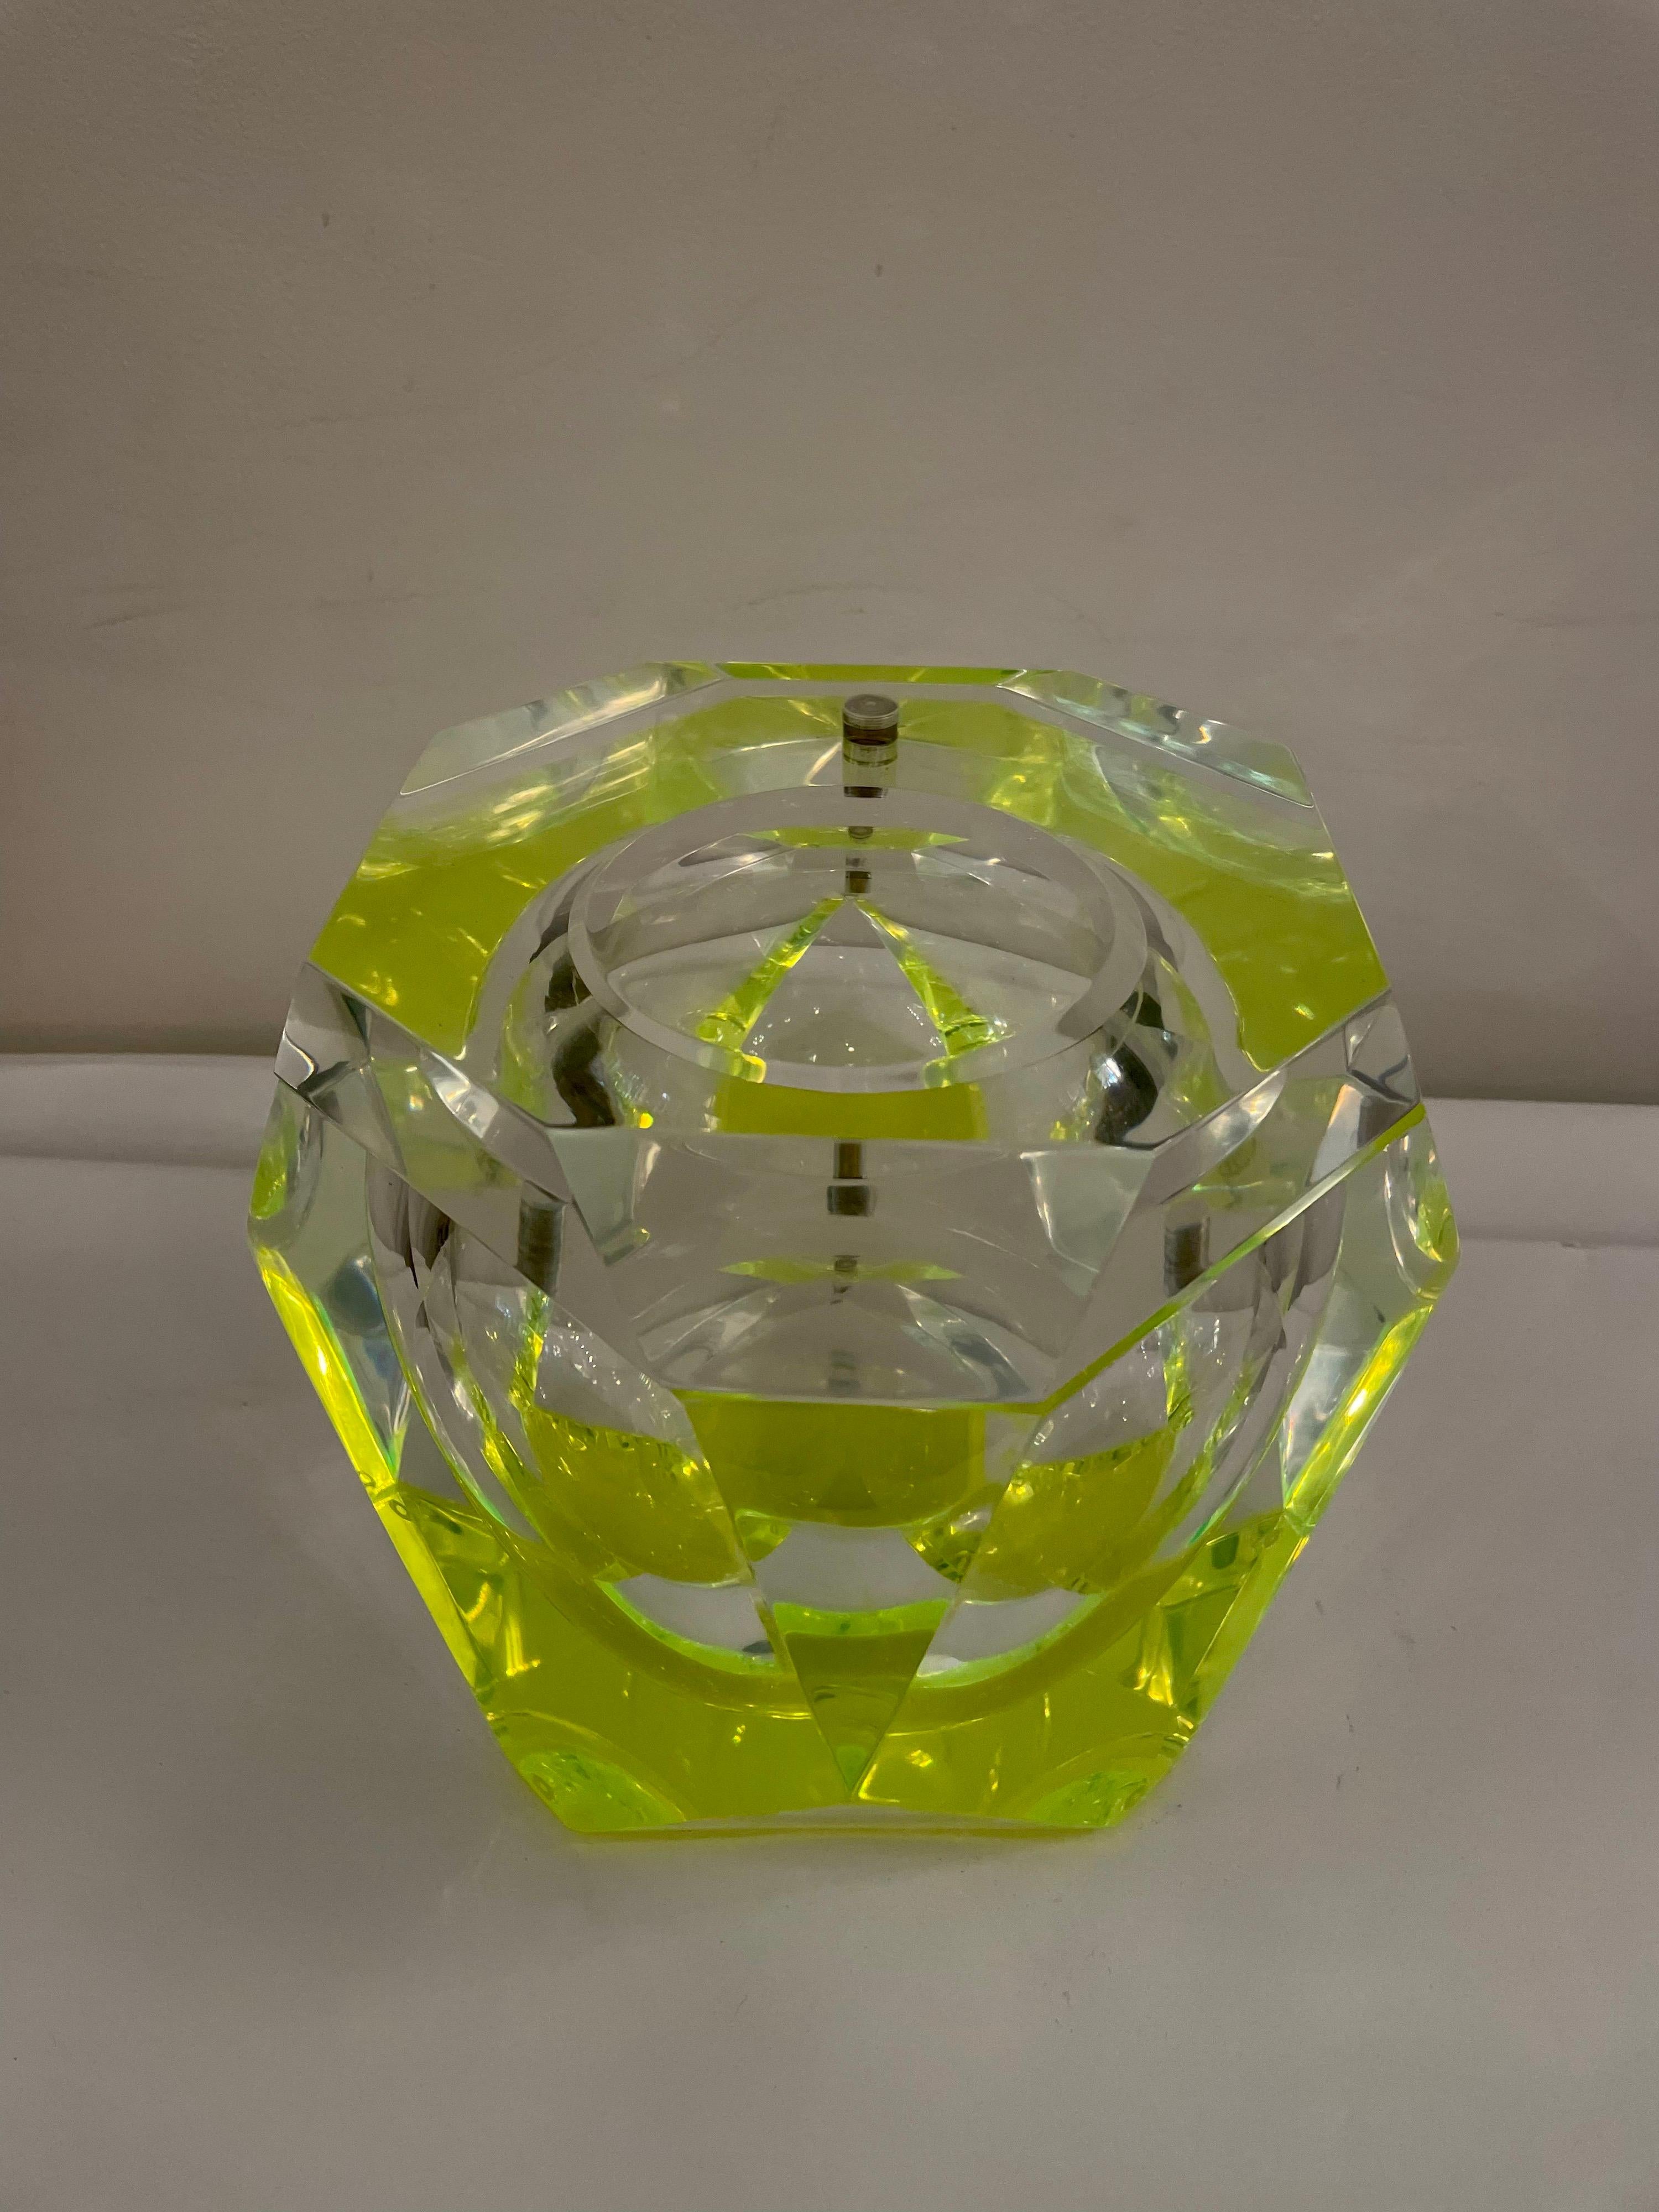 This incredible vintage Italian swivel top Lucite ice bucket with lime green infused color is a whimsical and modern.